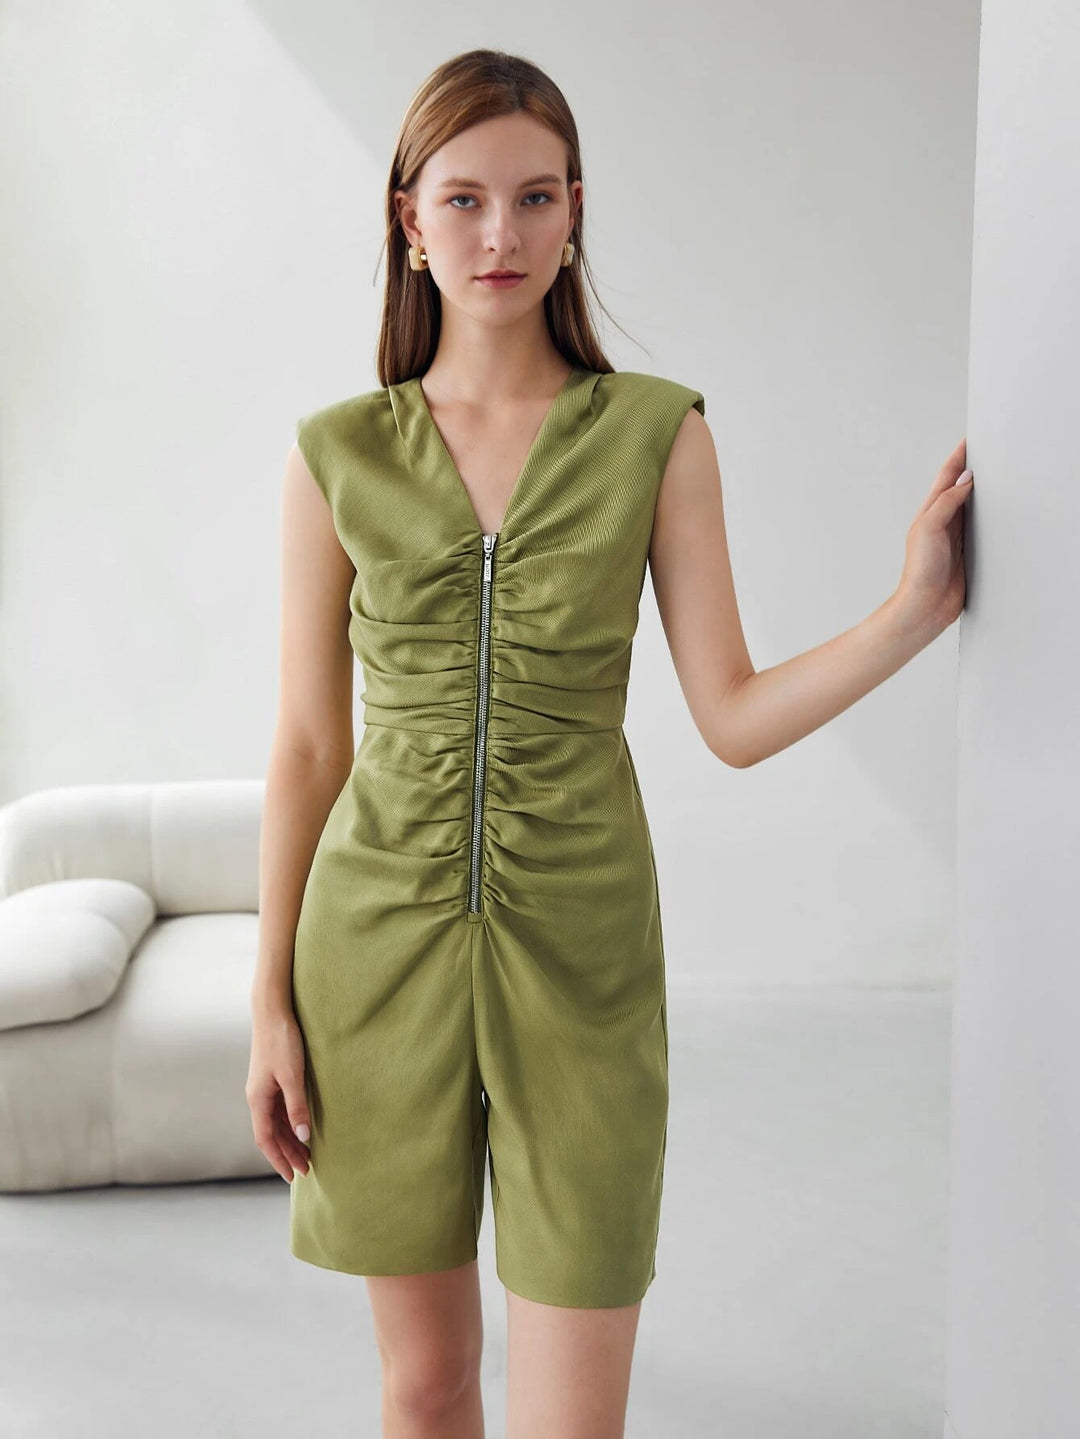 V Neck With Long Chain Patterned Jumpsuit